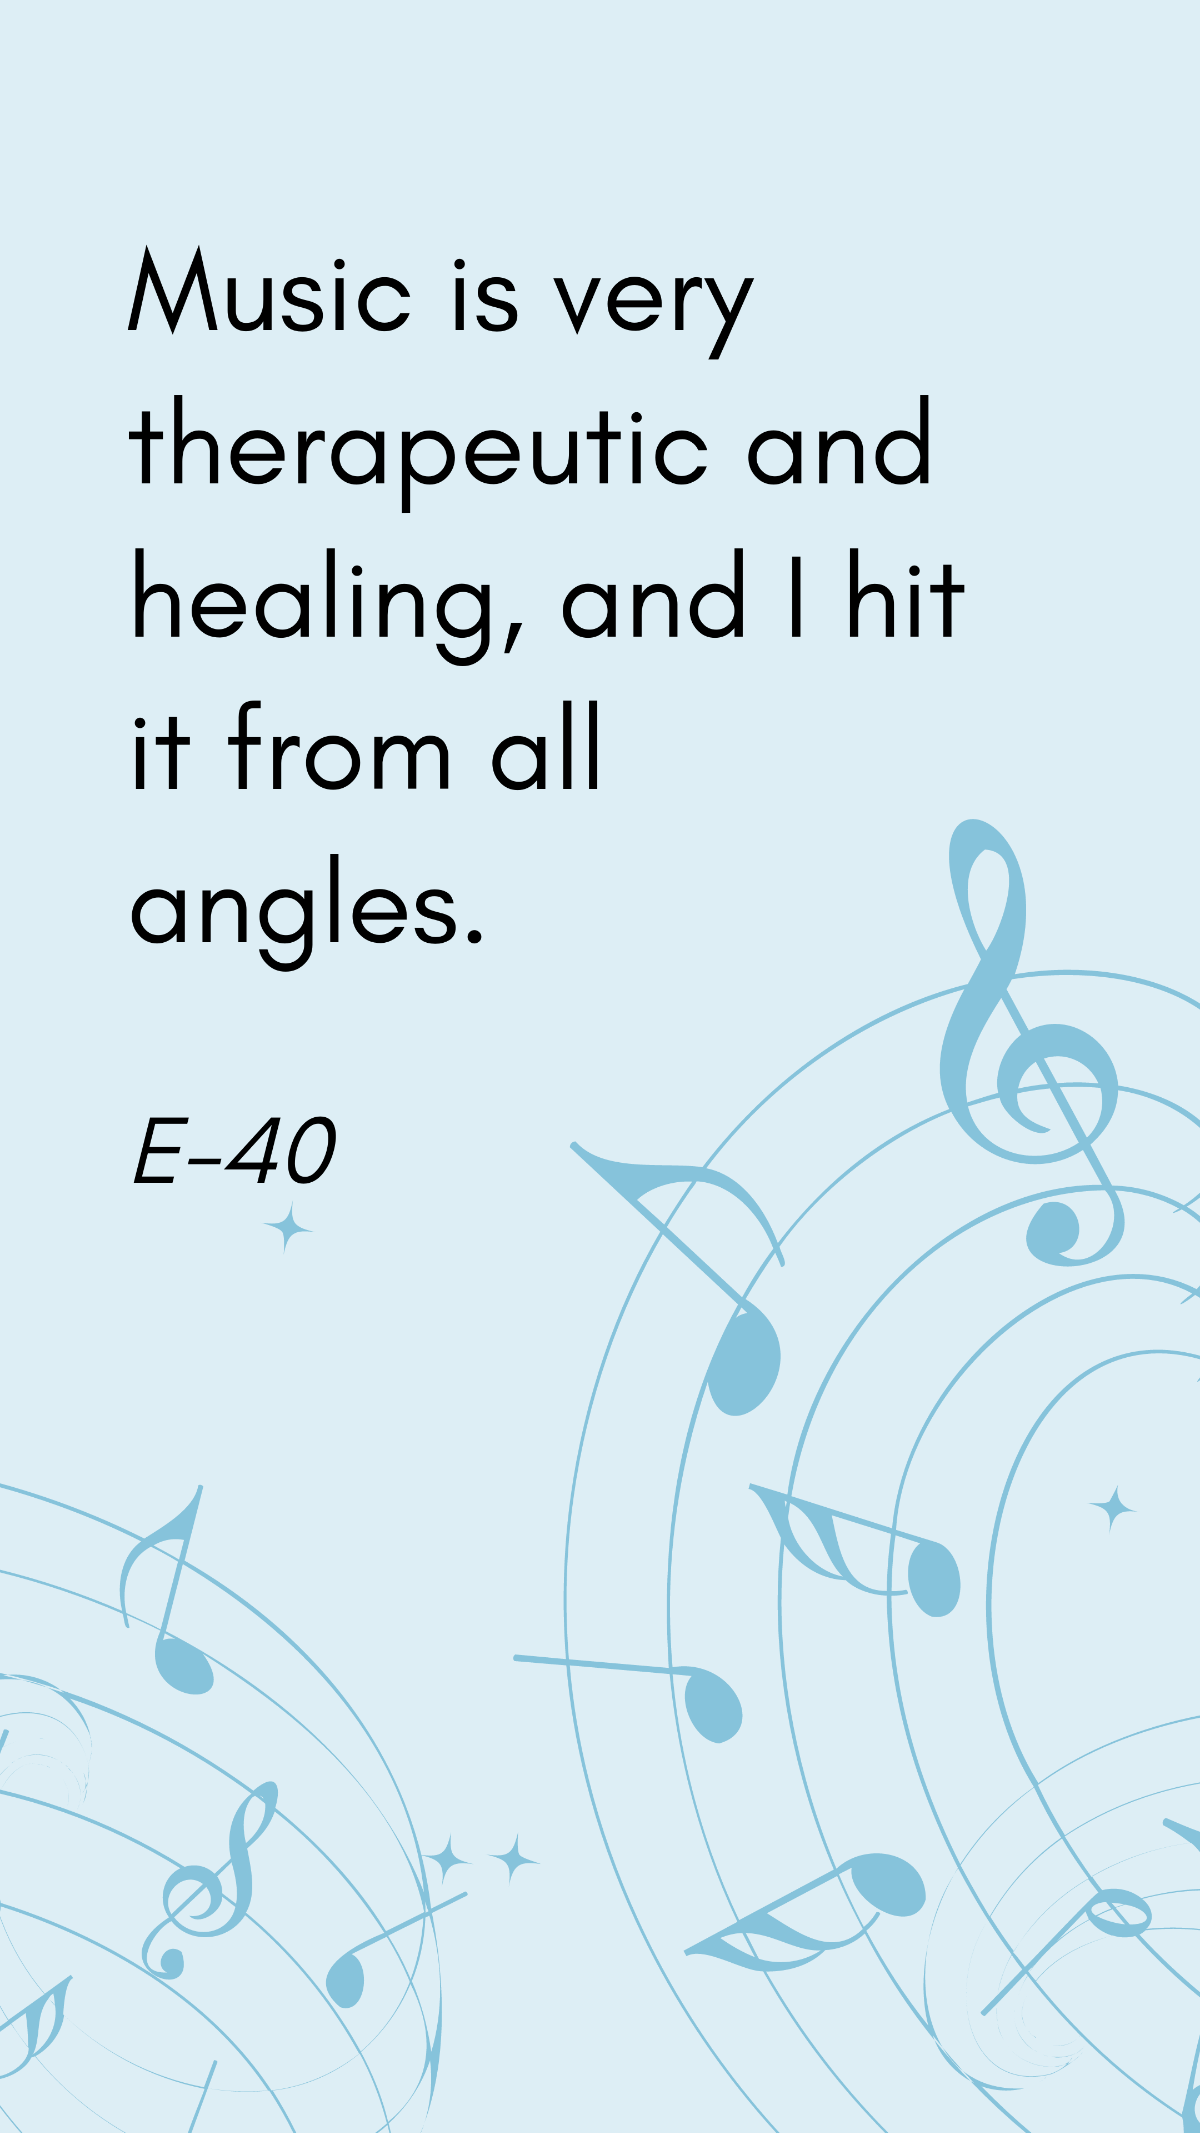 Free E-40 - Music is very therapeutic and healing, and I hit it from all angles. Template